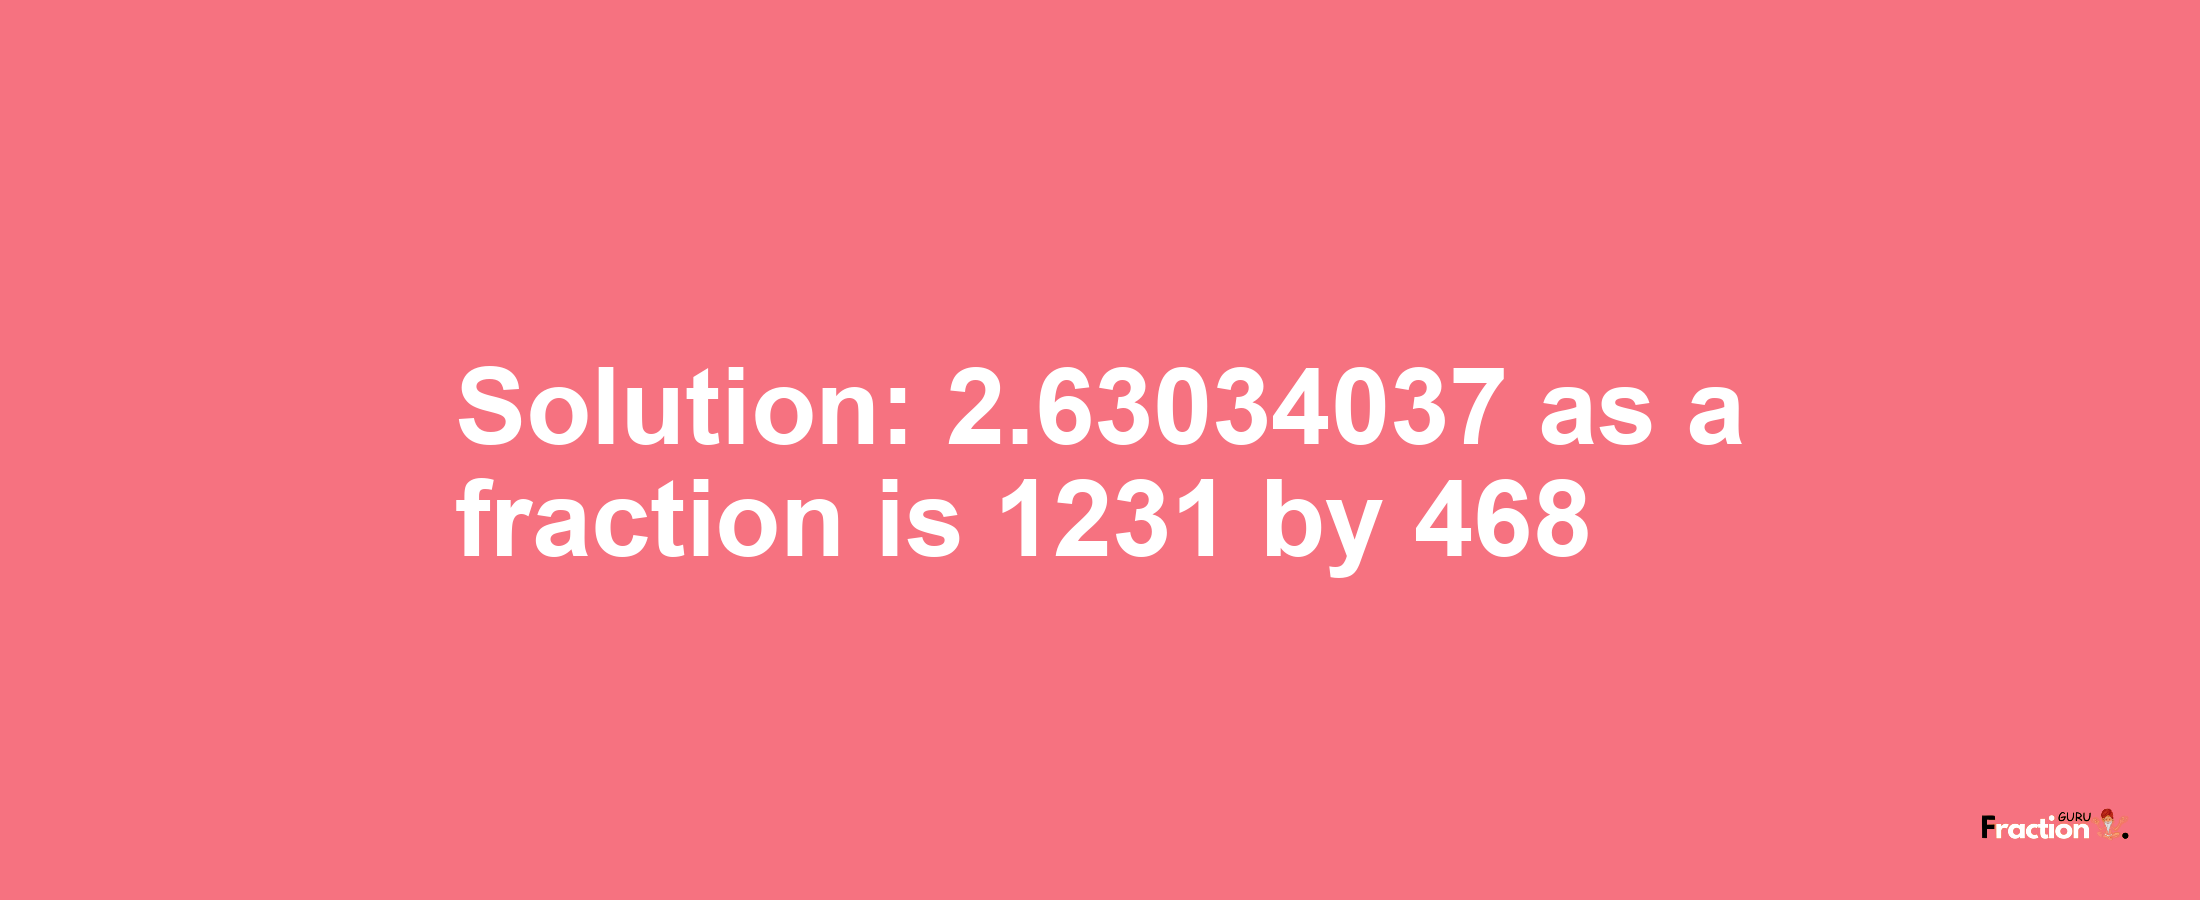 Solution:2.63034037 as a fraction is 1231/468